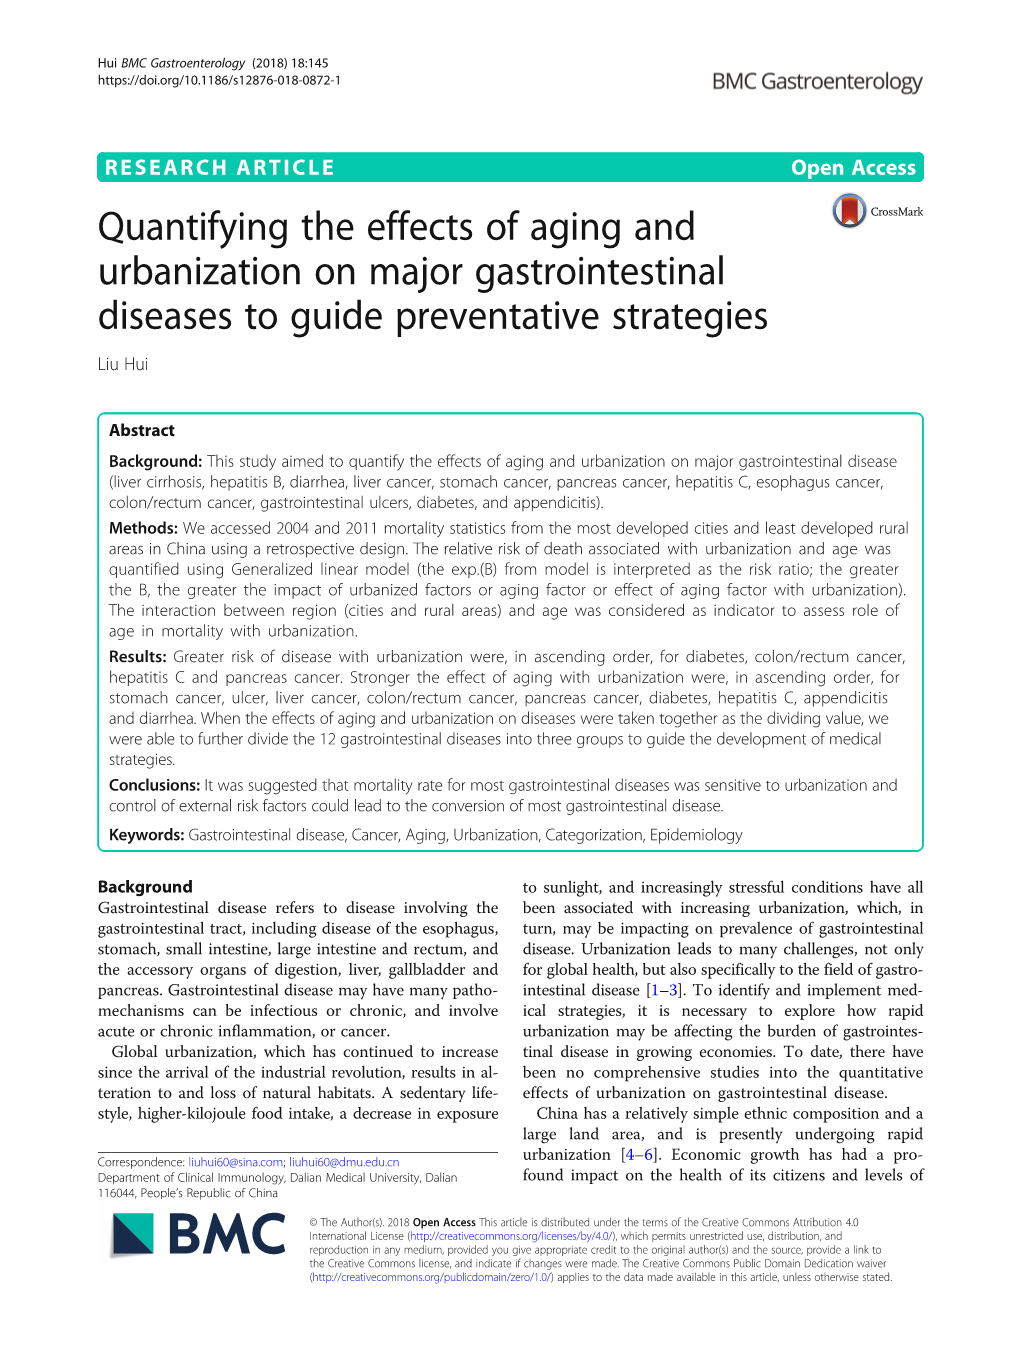 Quantifying the Effects of Aging and Urbanization on Major Gastrointestinal Diseases to Guide Preventative Strategies Liu Hui